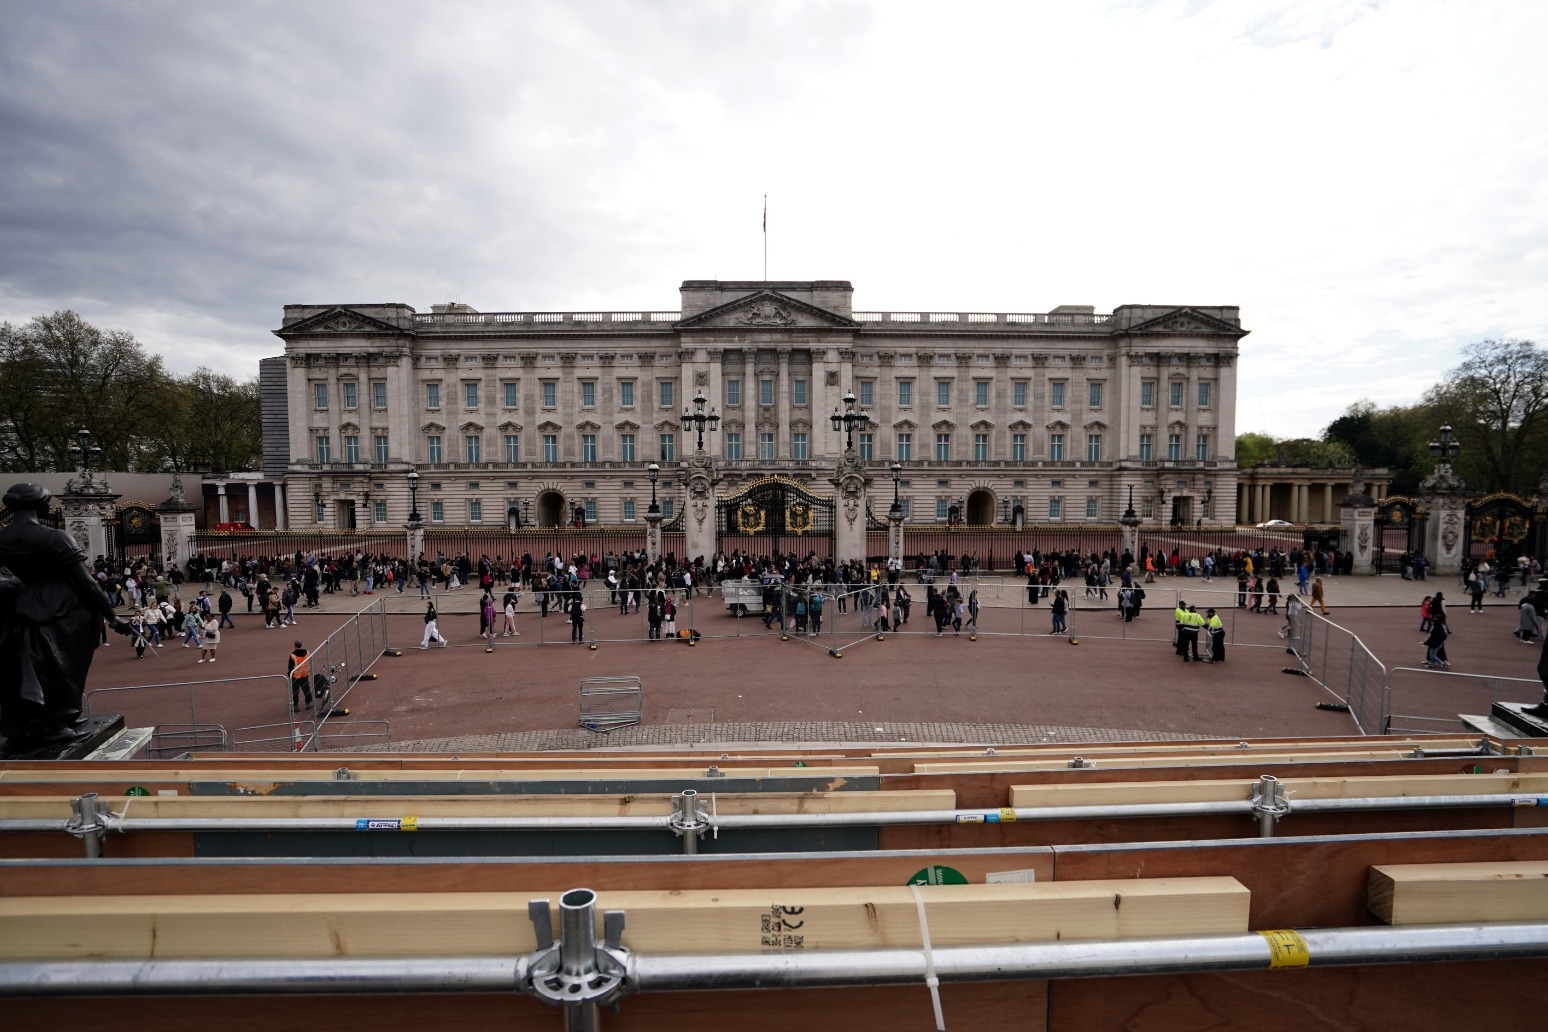 Man arrested outside Buckingham Palace asked to speak to soldier 